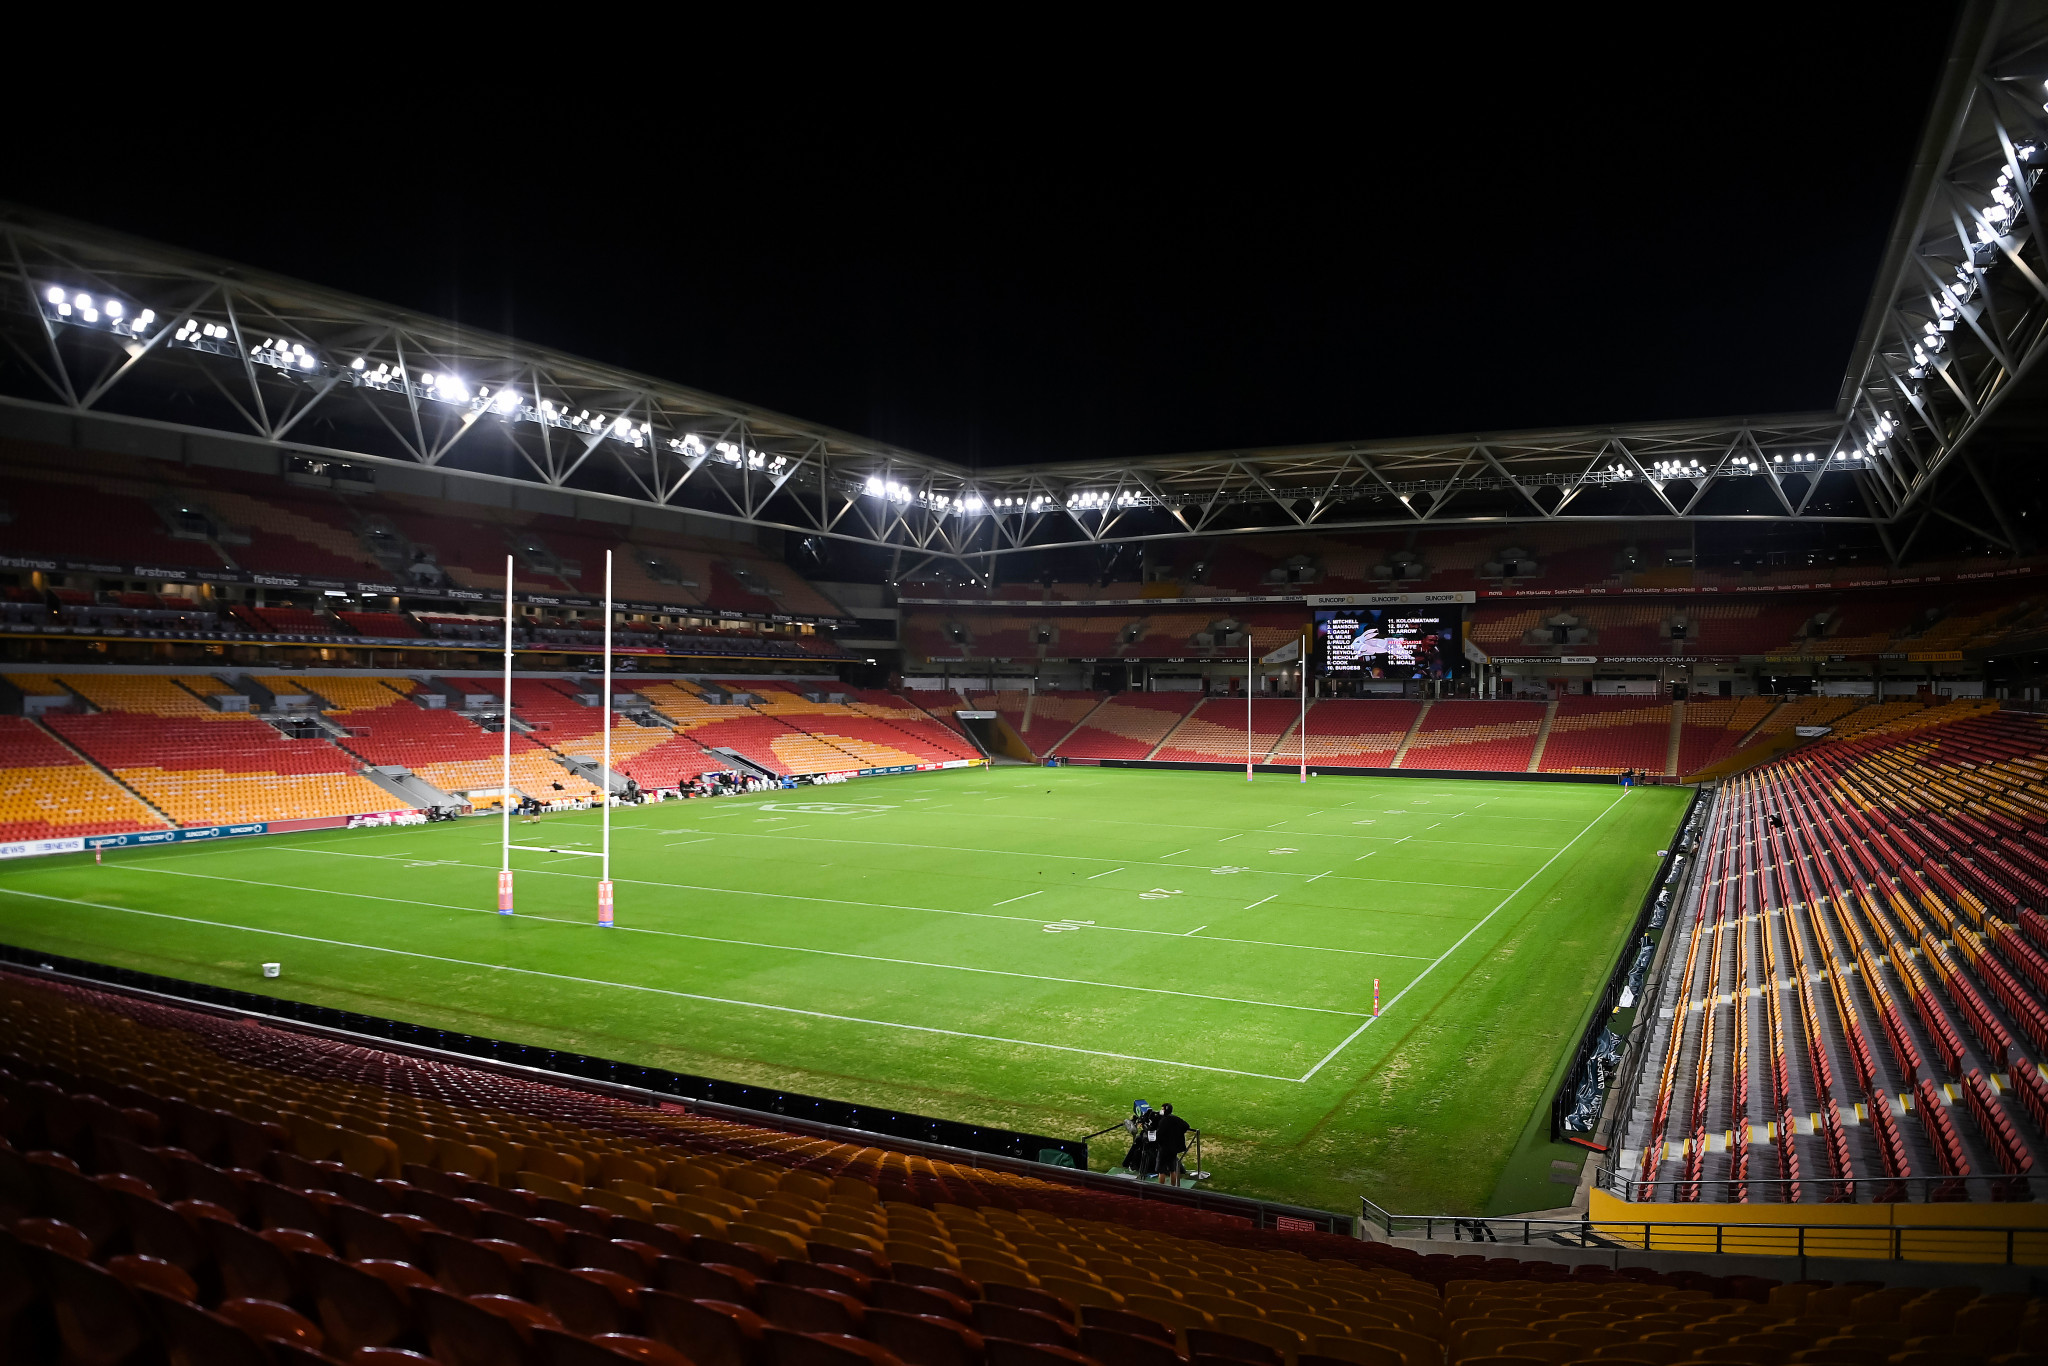 The Suncorp Stadium in Brisbane will host the fourth round of matches in the Rugby Championship, after games were moved from Sydney, Newcastle and Canberra in Australia, and Auckland and Dunedin in New Zealand due to COVID-19 restrictions ©Getty Images